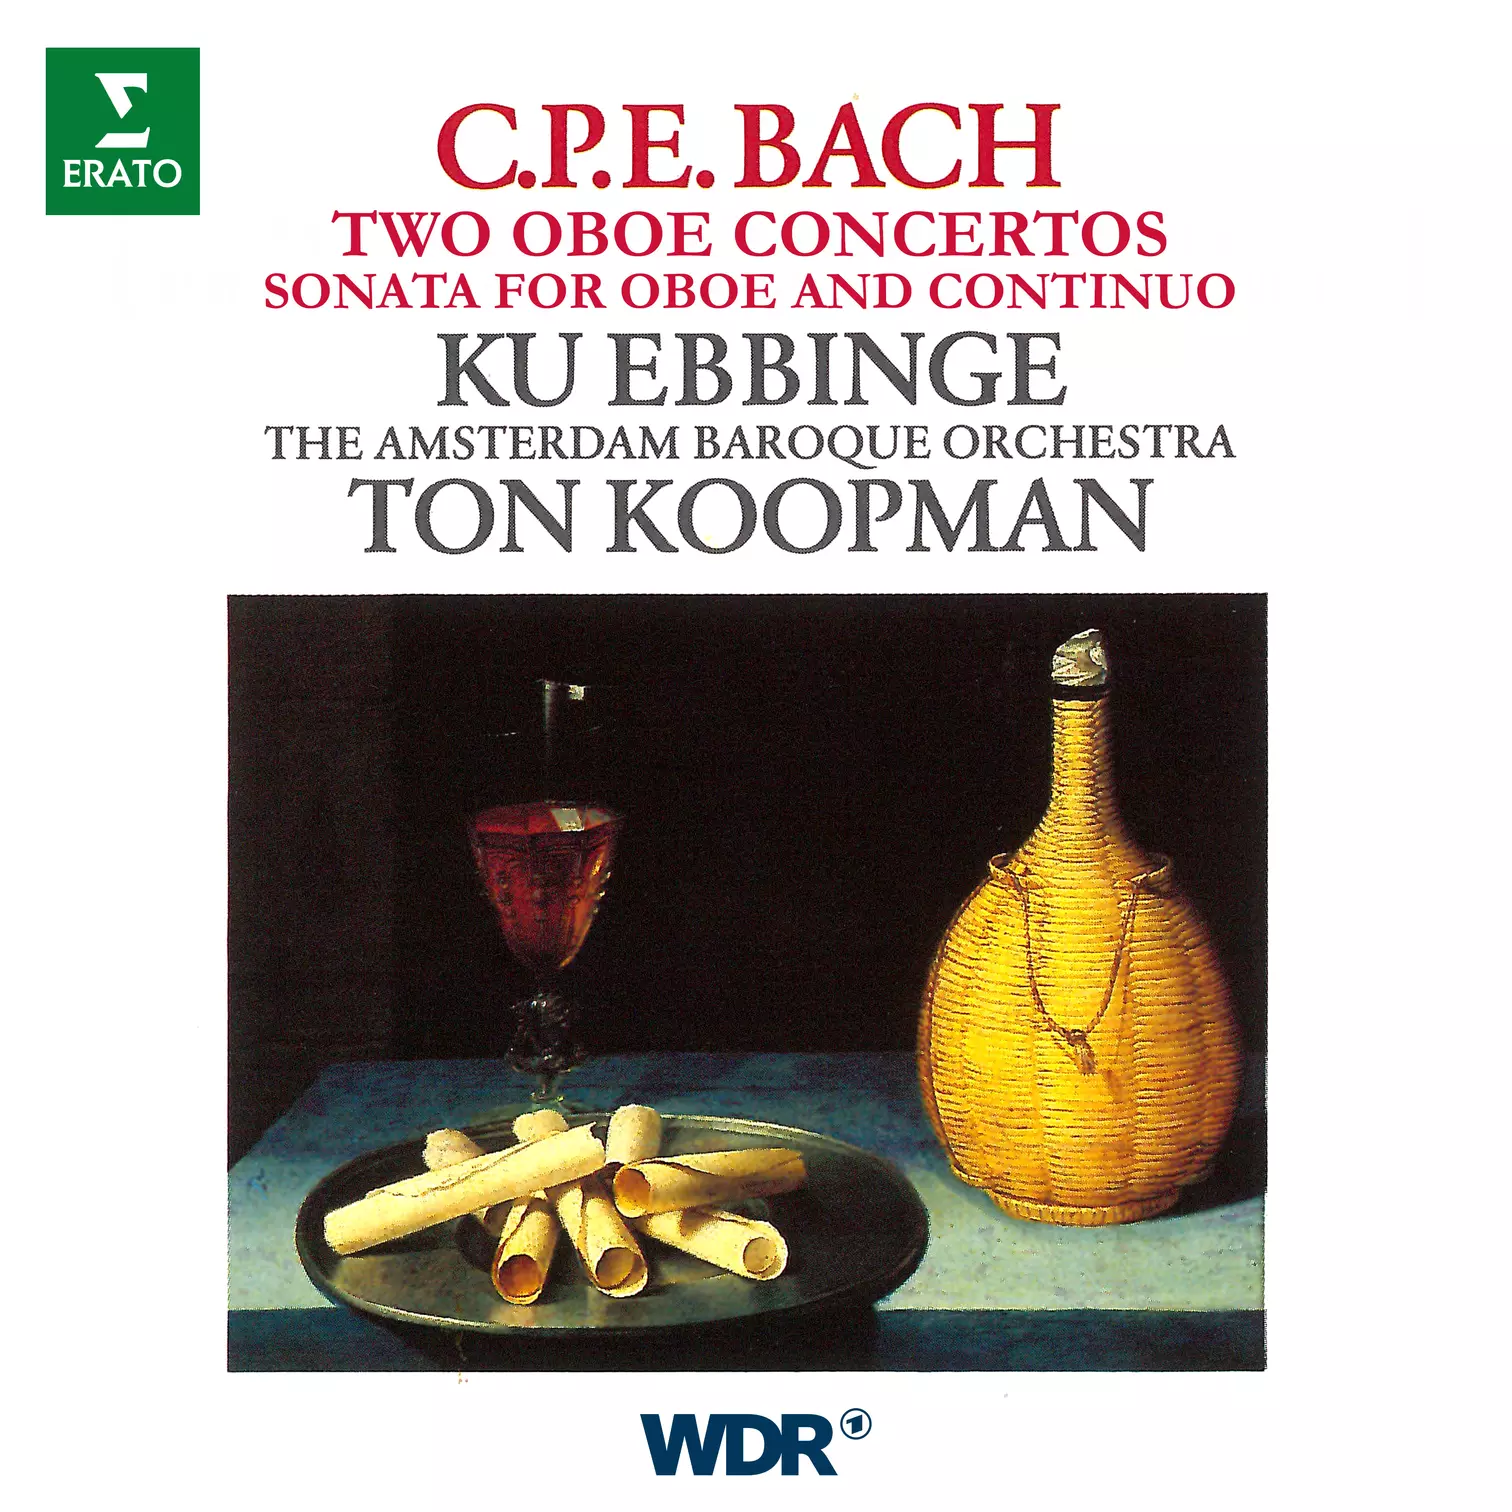 CPE Bach: Two Oboe Concertos & Sonata for Oboe and Continuo